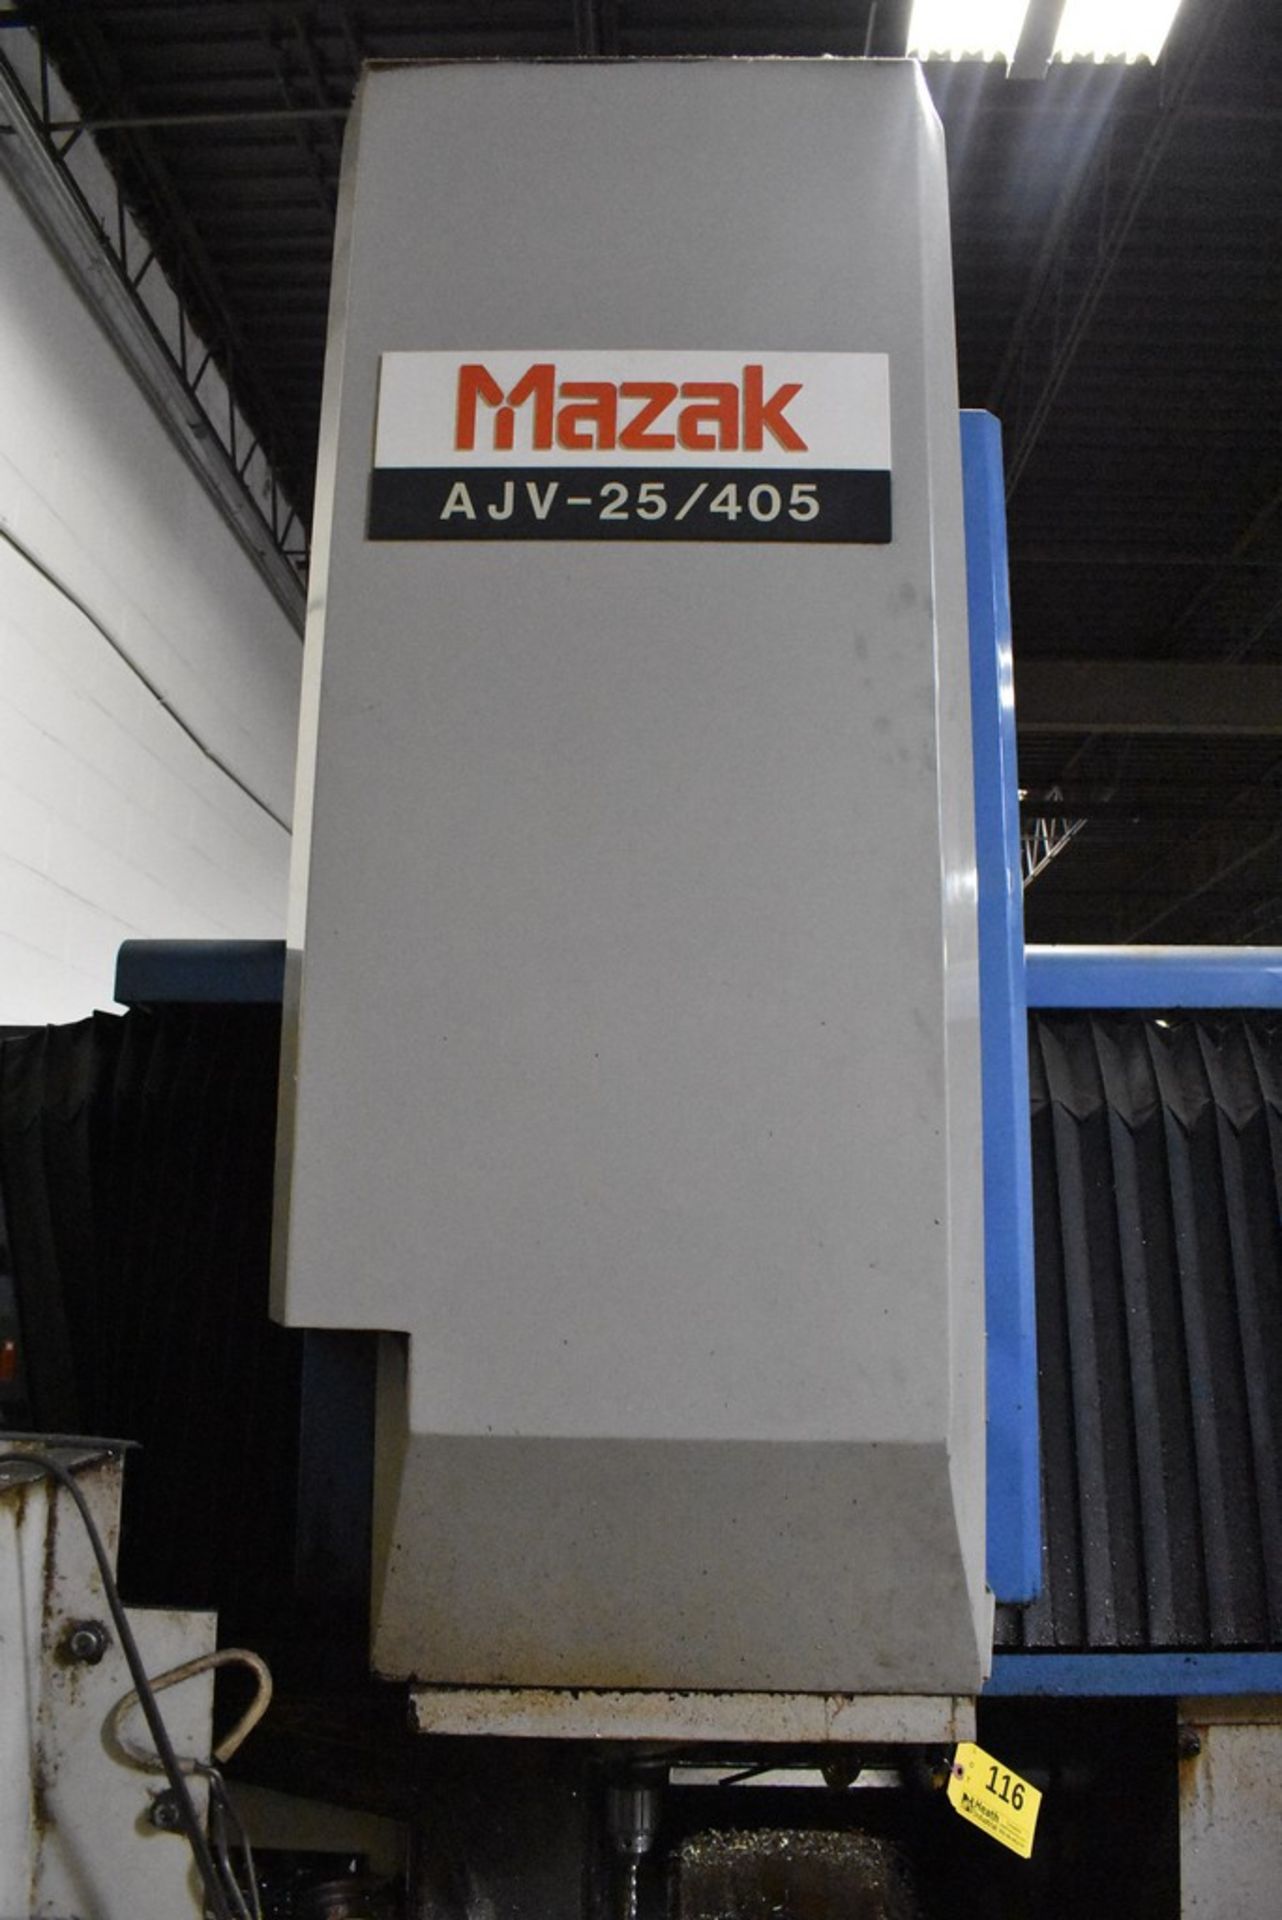 MAZAK MODEL AJV25/405 CNC VERTICAL MACHINING CENTER, S/N 77005, 39.4" X-AXIS TRAVEL, 20" Y-AXIS - Image 3 of 10